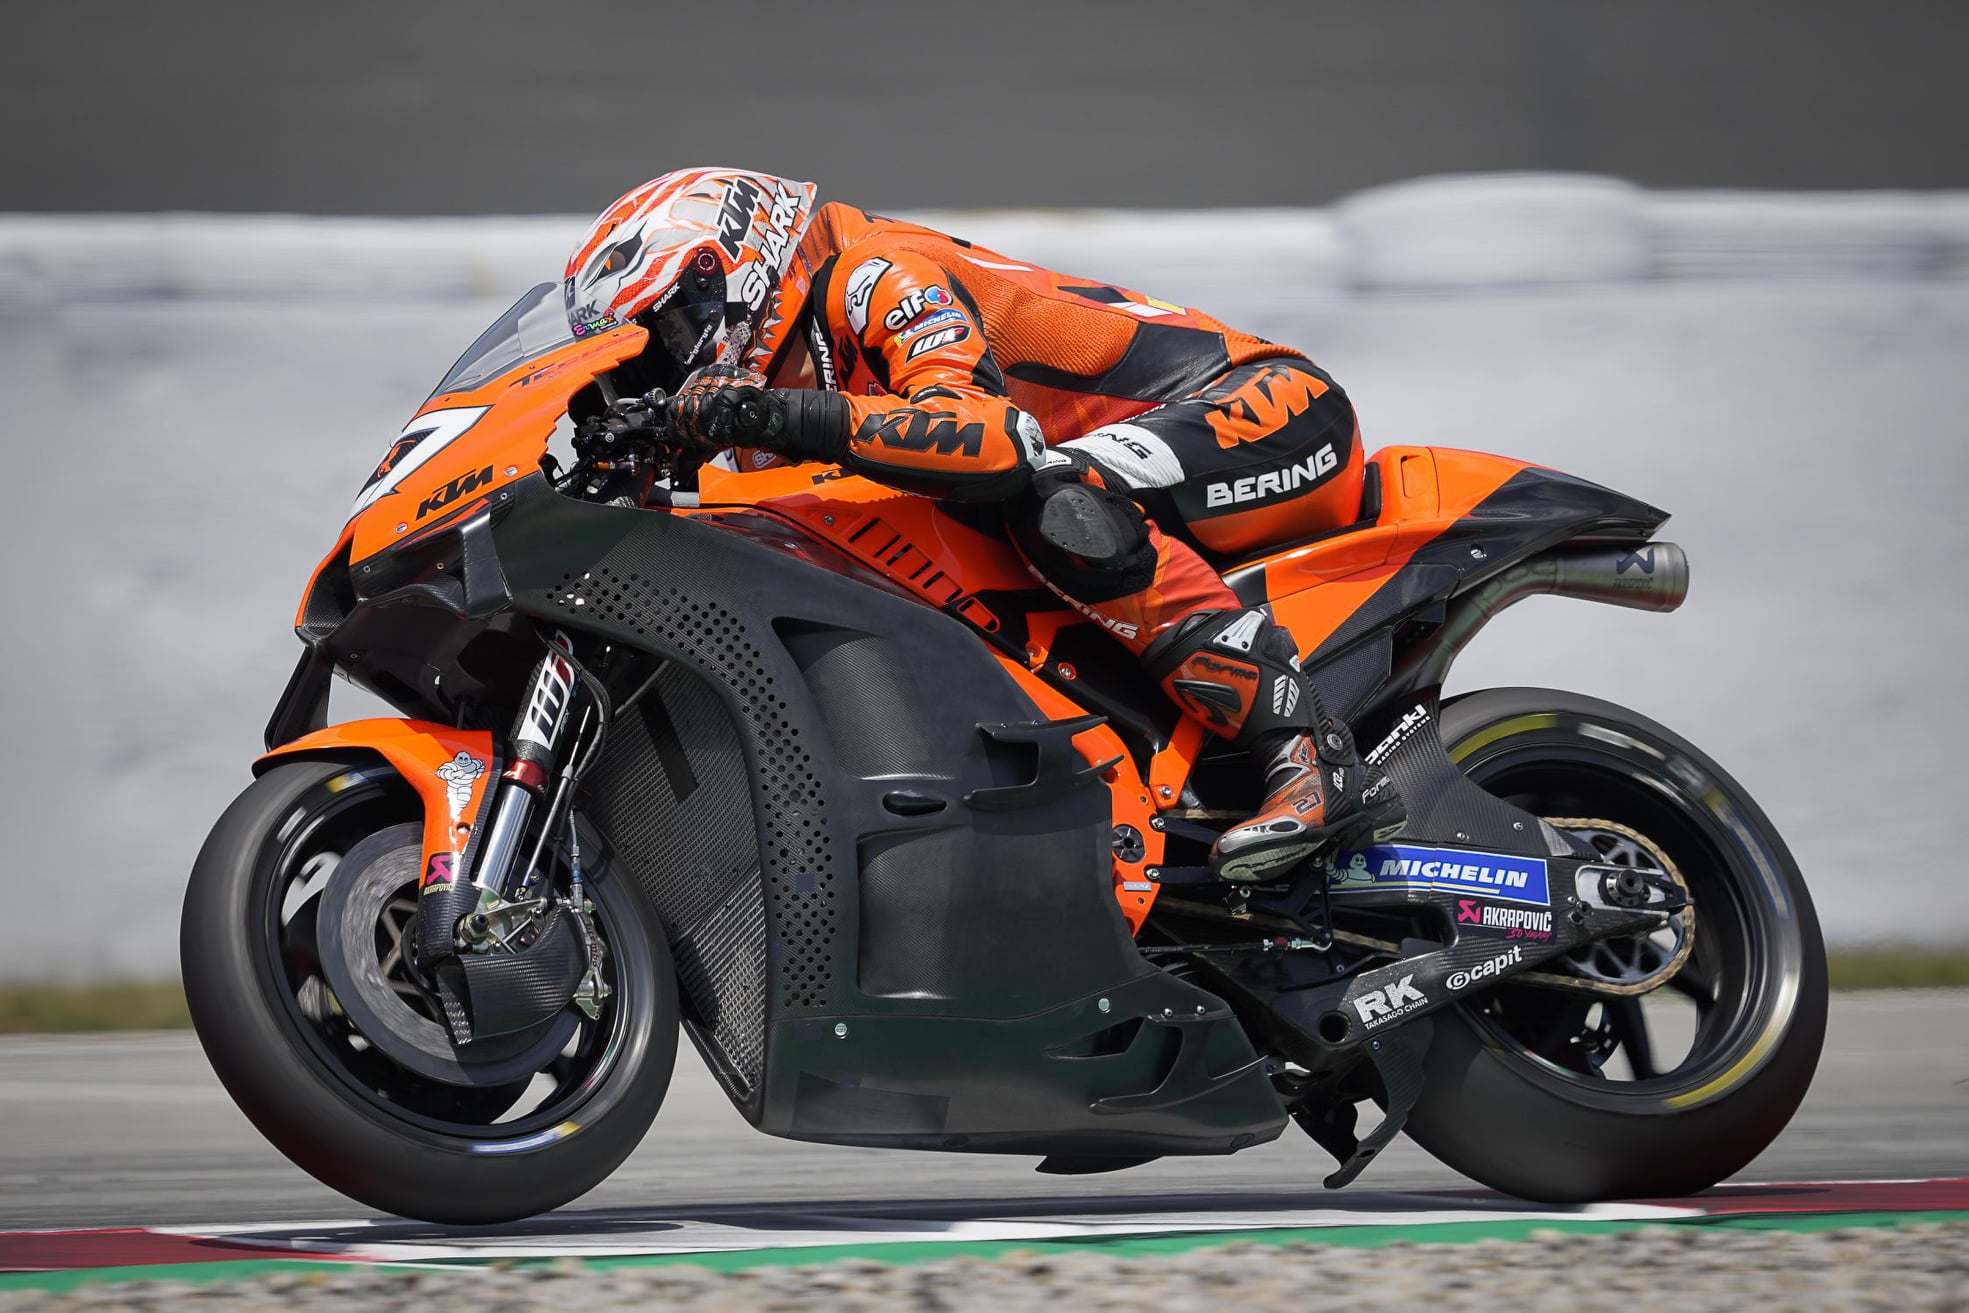 “Spy Attitude” MotoGP: Chassis, swingarm, exhaust, aero… the test in Catalonia was fruitful for KTM